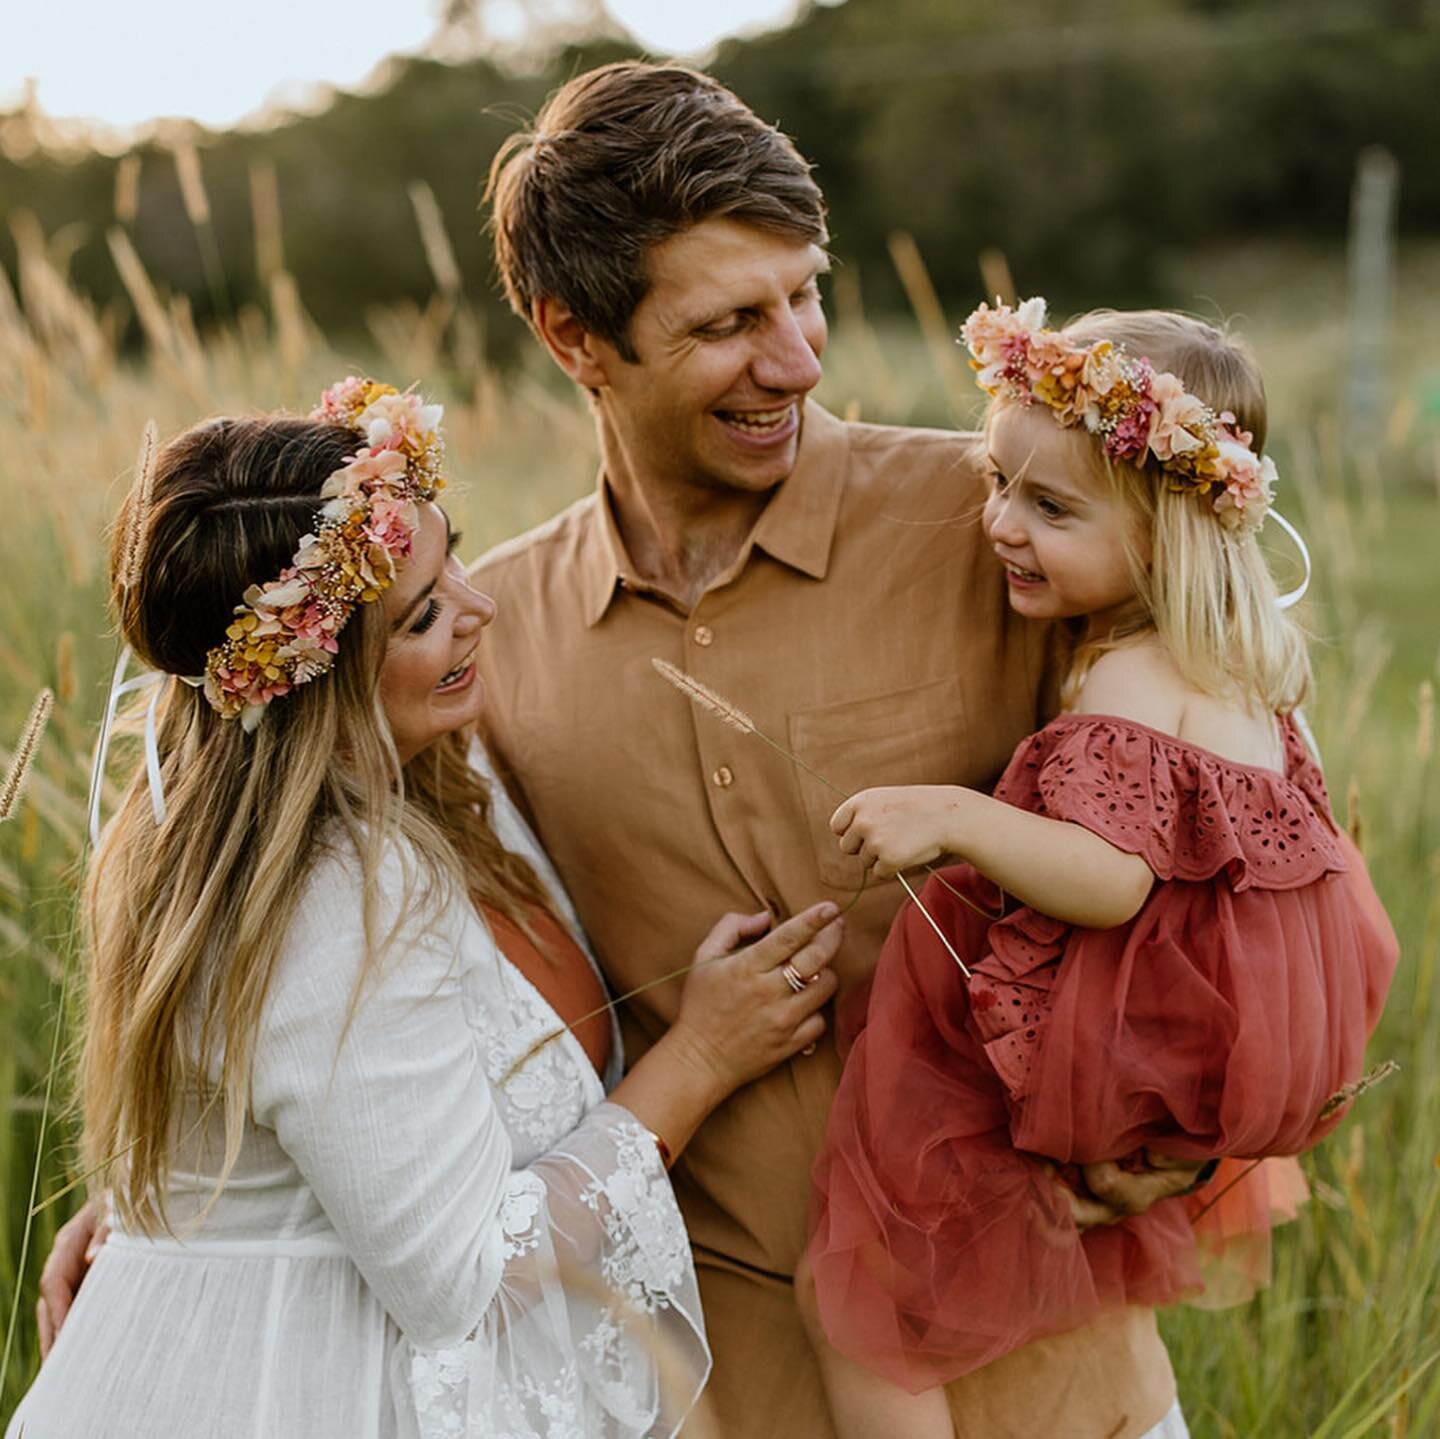 Happy Father&rsquo;s Day to the most amazing, kind, caring and fun daddy! We love you so much and feel so lucky every day 🥰

Photos from our maternity shoot (pregnant with Easton) by the amazing @abouttimeco